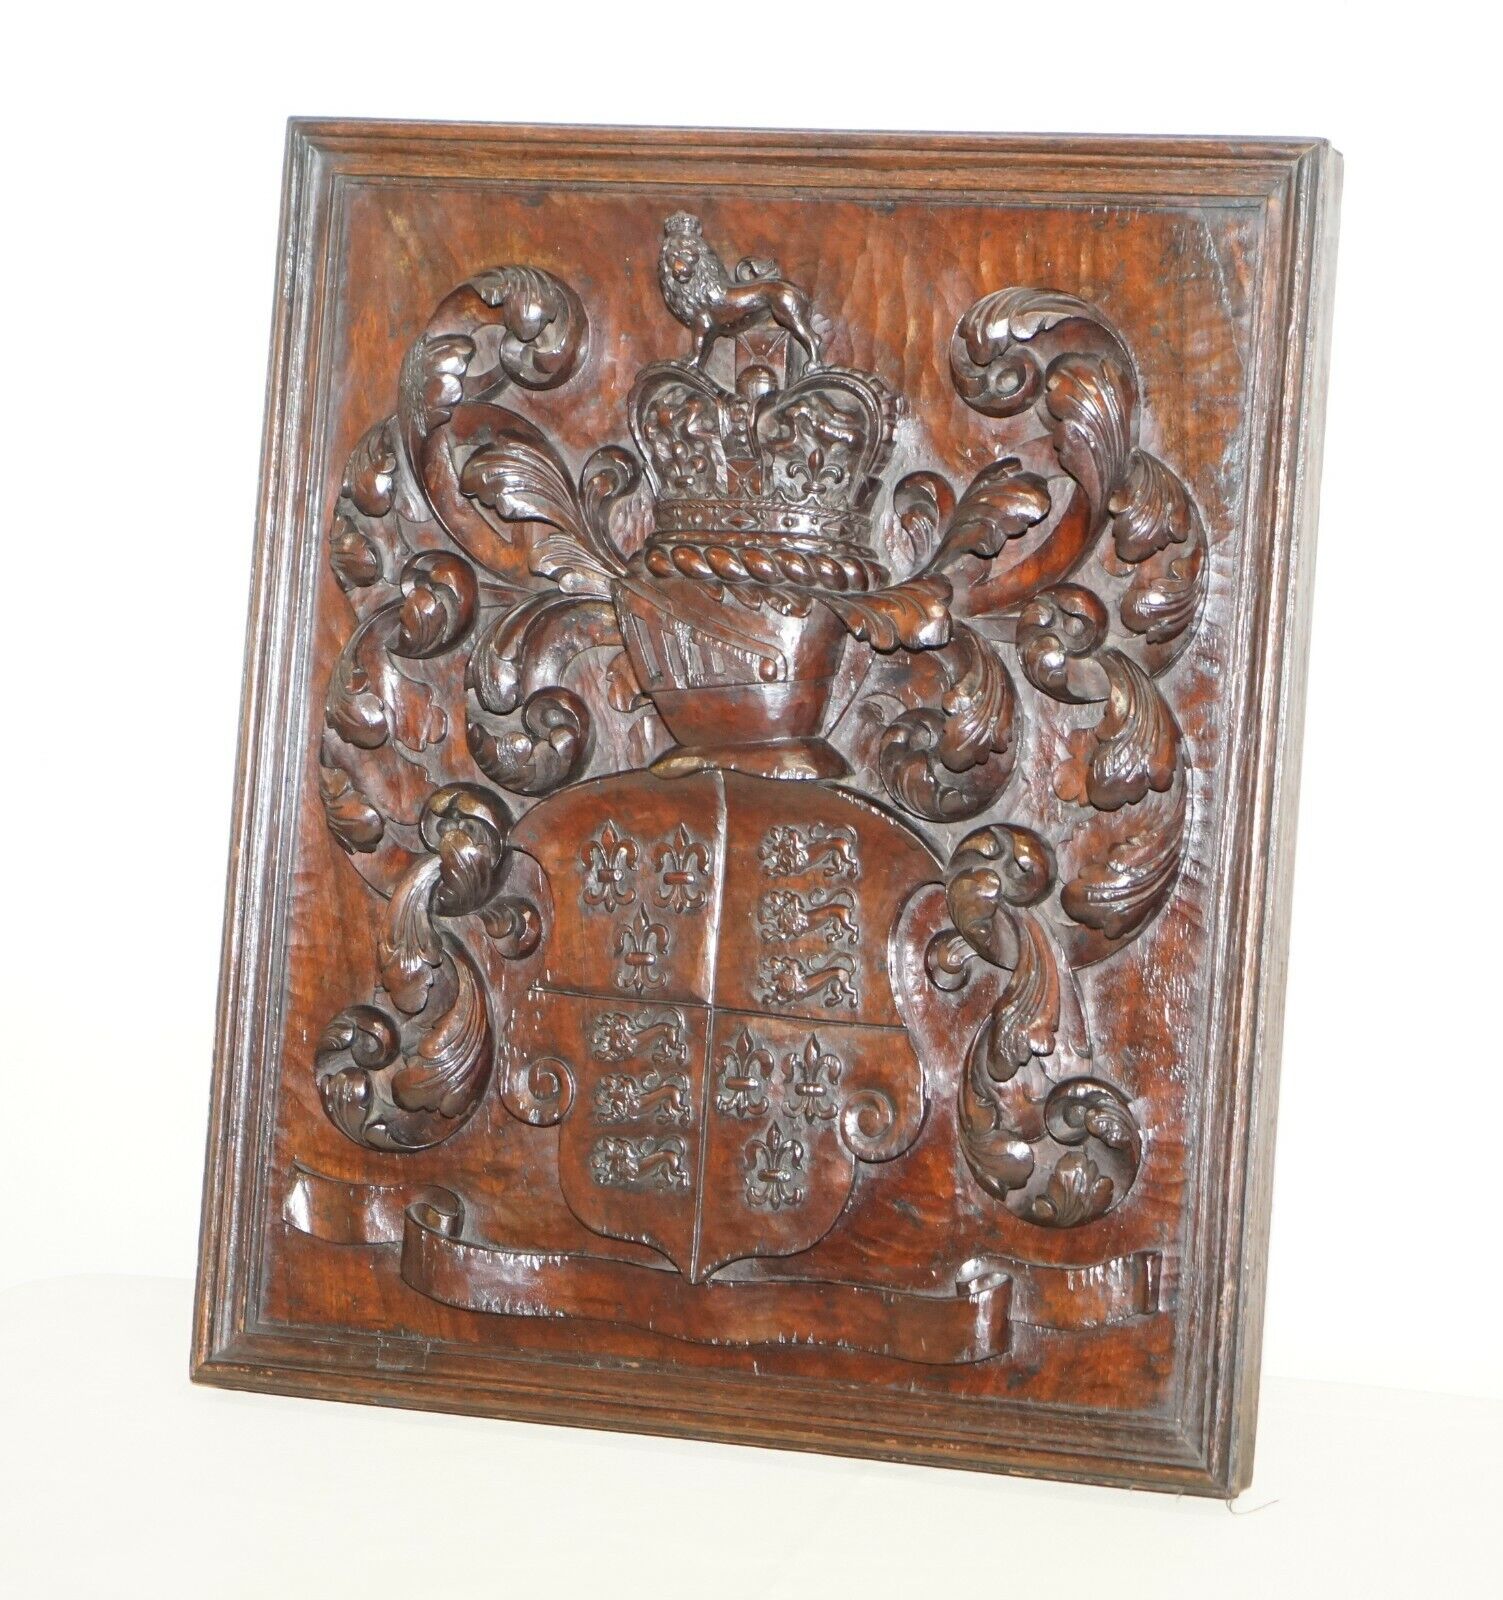 RARE ANTIQUE 1405-1603 ENGLISH ROYAL COAT OF ARMS ARMORIAL CREST CARVED WALNUT